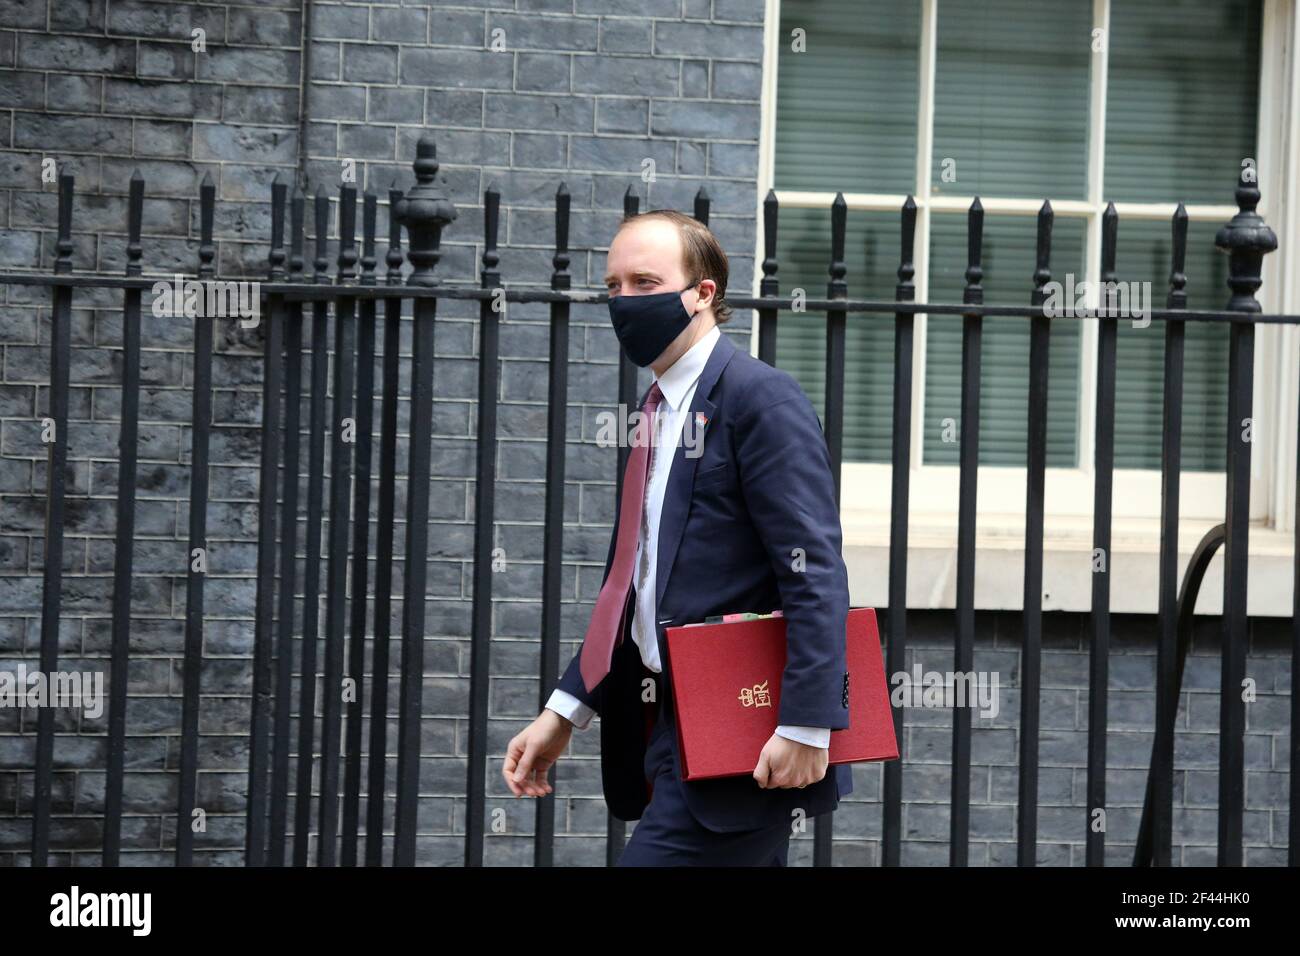 March 19, 2021, London, England, United Kingdom: Secretary of State for Health and Social Care MATT HANCOCK  is seen arriving at 10 Downing Street as PM Boris Johnson gets ready to get Astra Zeneca vaccine today. (Credit Image: © Tayfun Salci/ZUMA Wire) Stock Photo